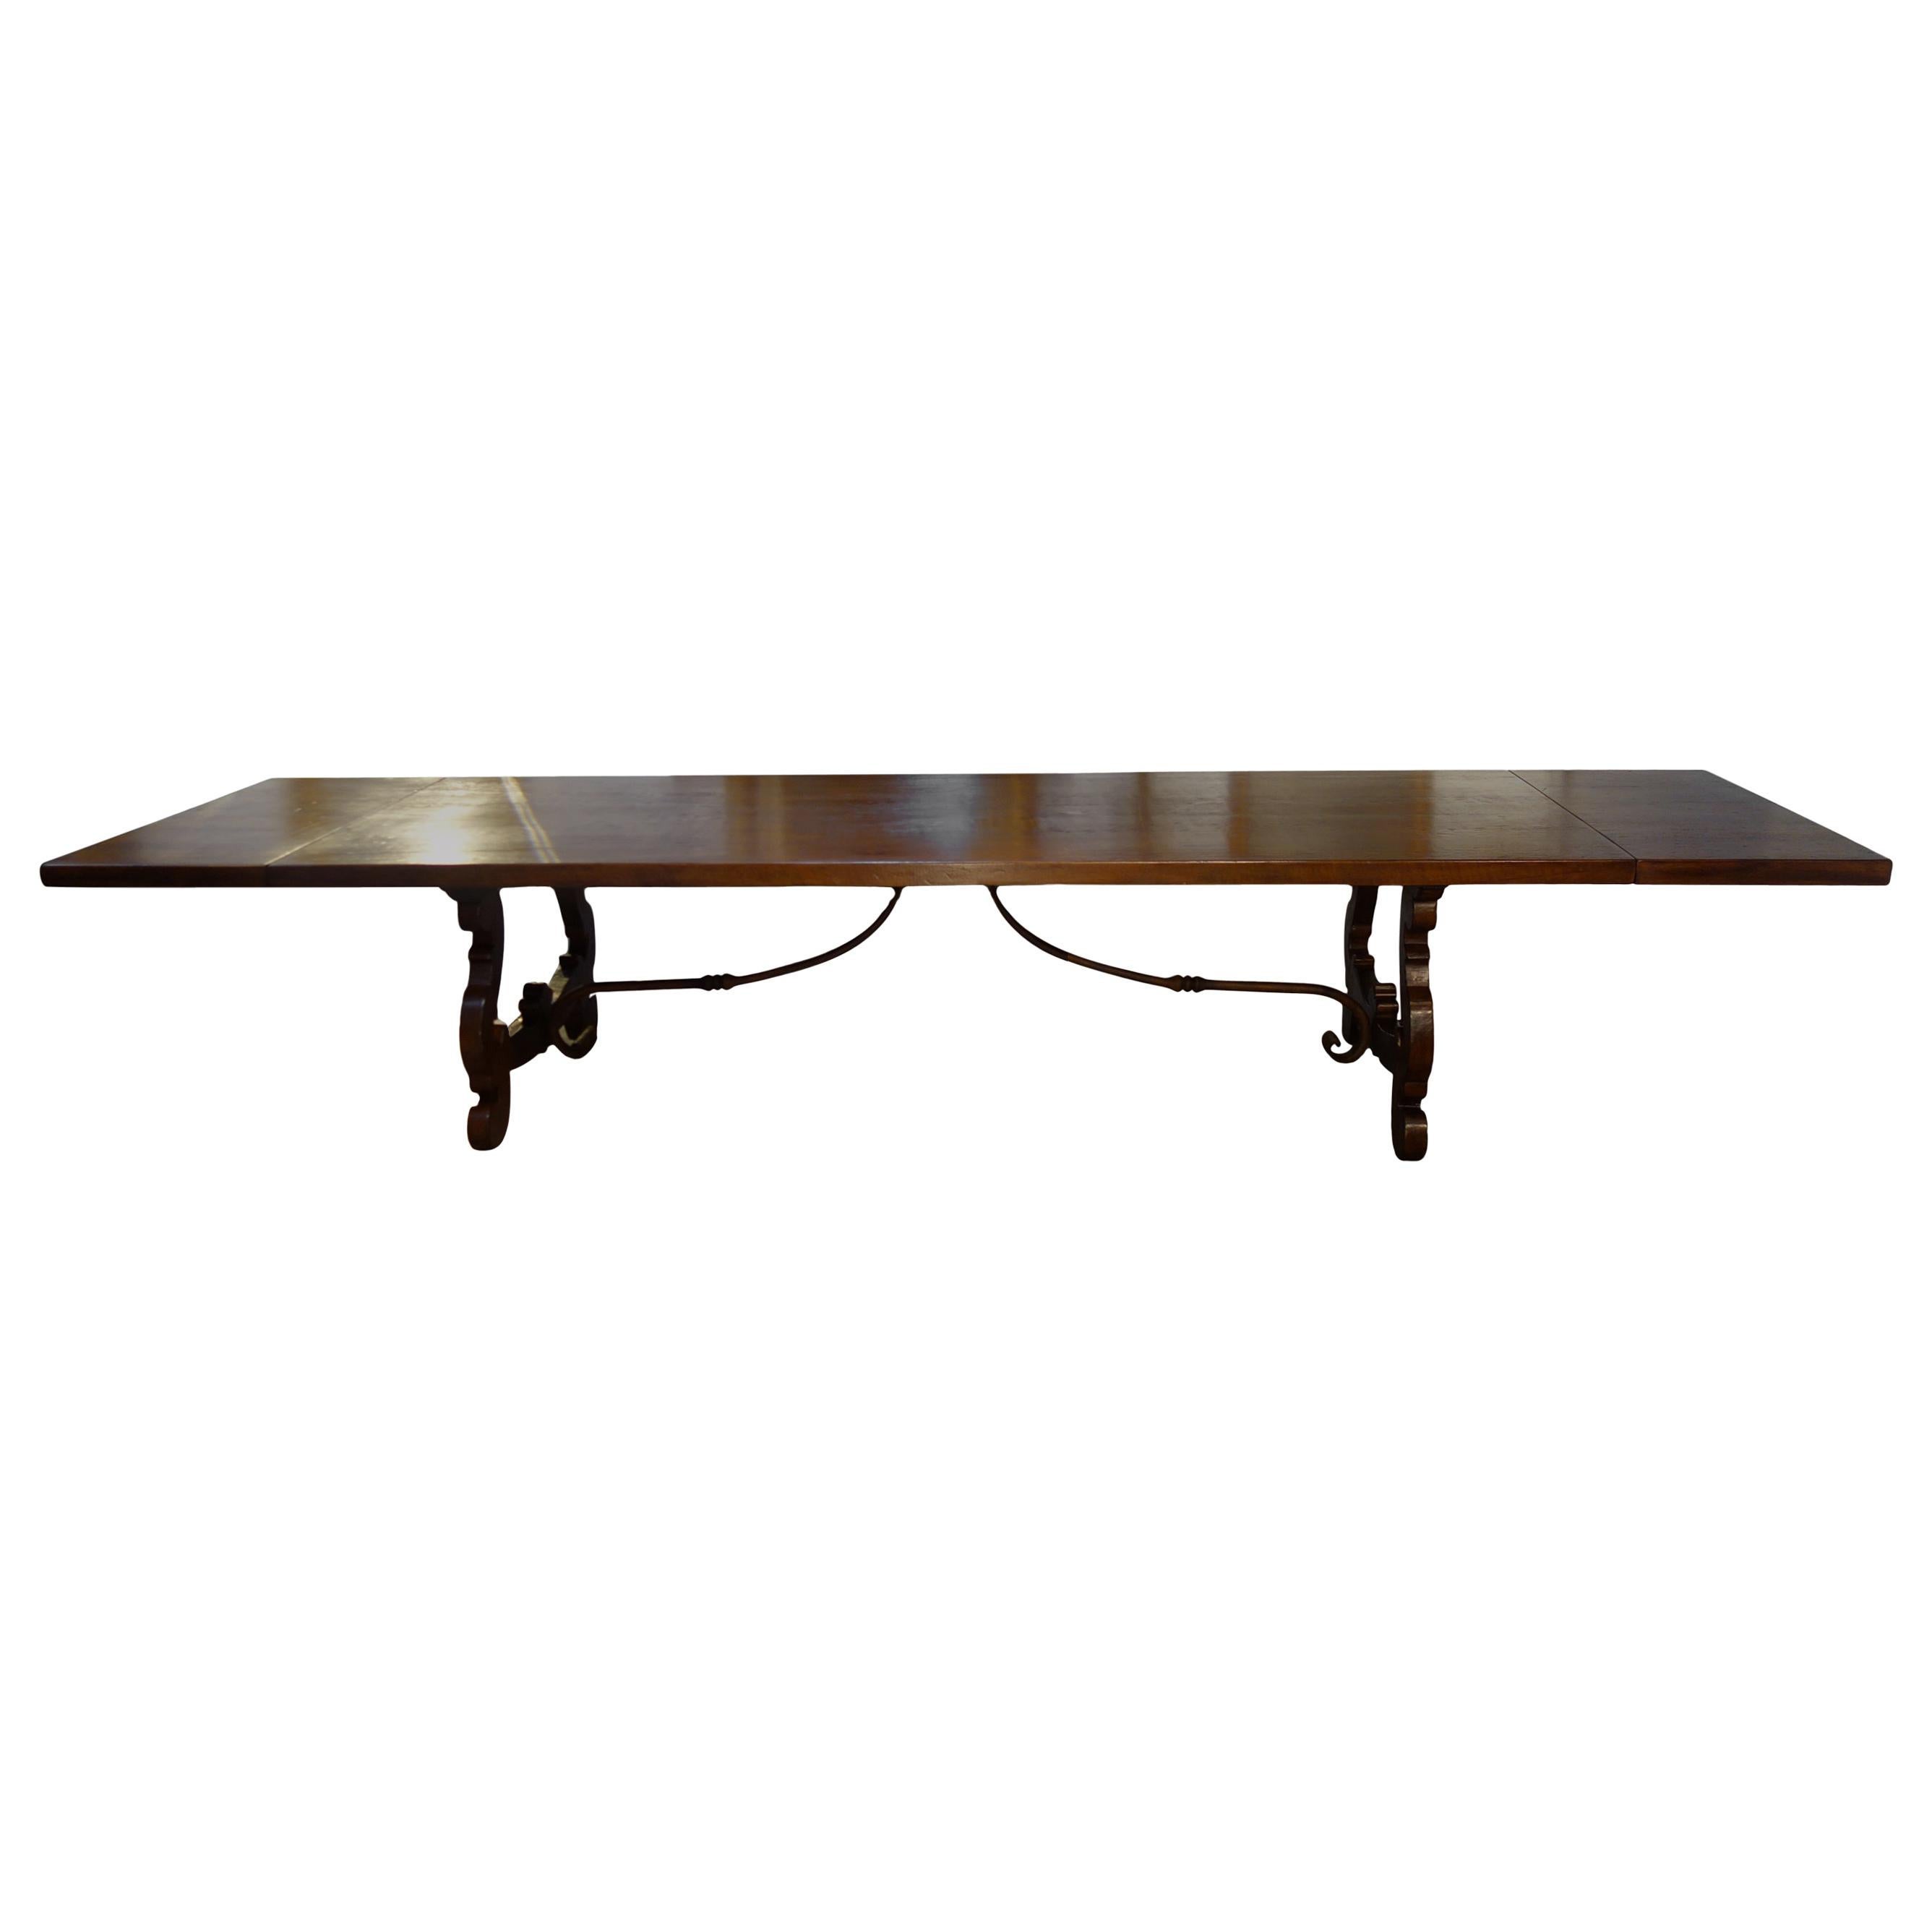 17th C Refectory Style Italian Walnut Dining Table with End Extensions & options